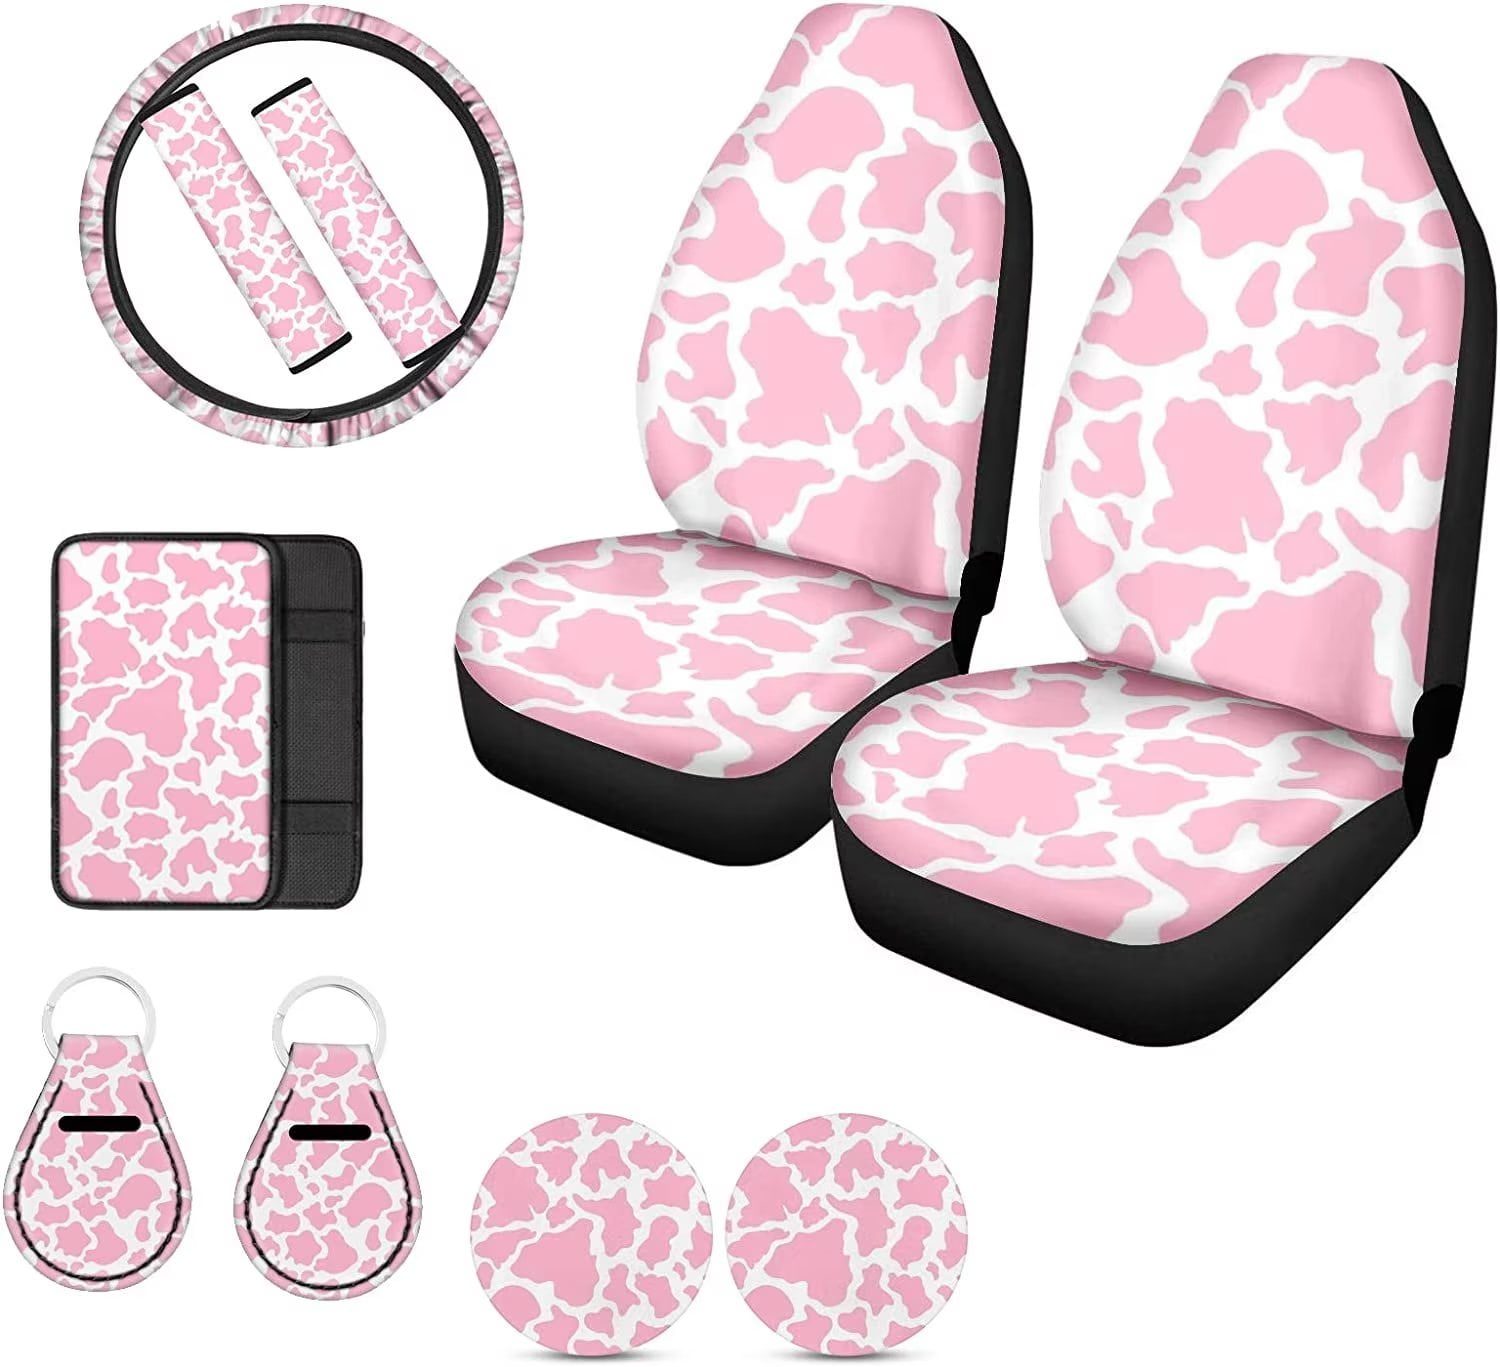 Pzuqiu Cow Print Girly Cute Car Accessories Car Cover Seat with Steering  Wheel Cover+ Car Coasters+ Auto Keychains+ Seat Belt Pad Cover+ Center  Console Pad Pink Camo Full Set for Women Decor